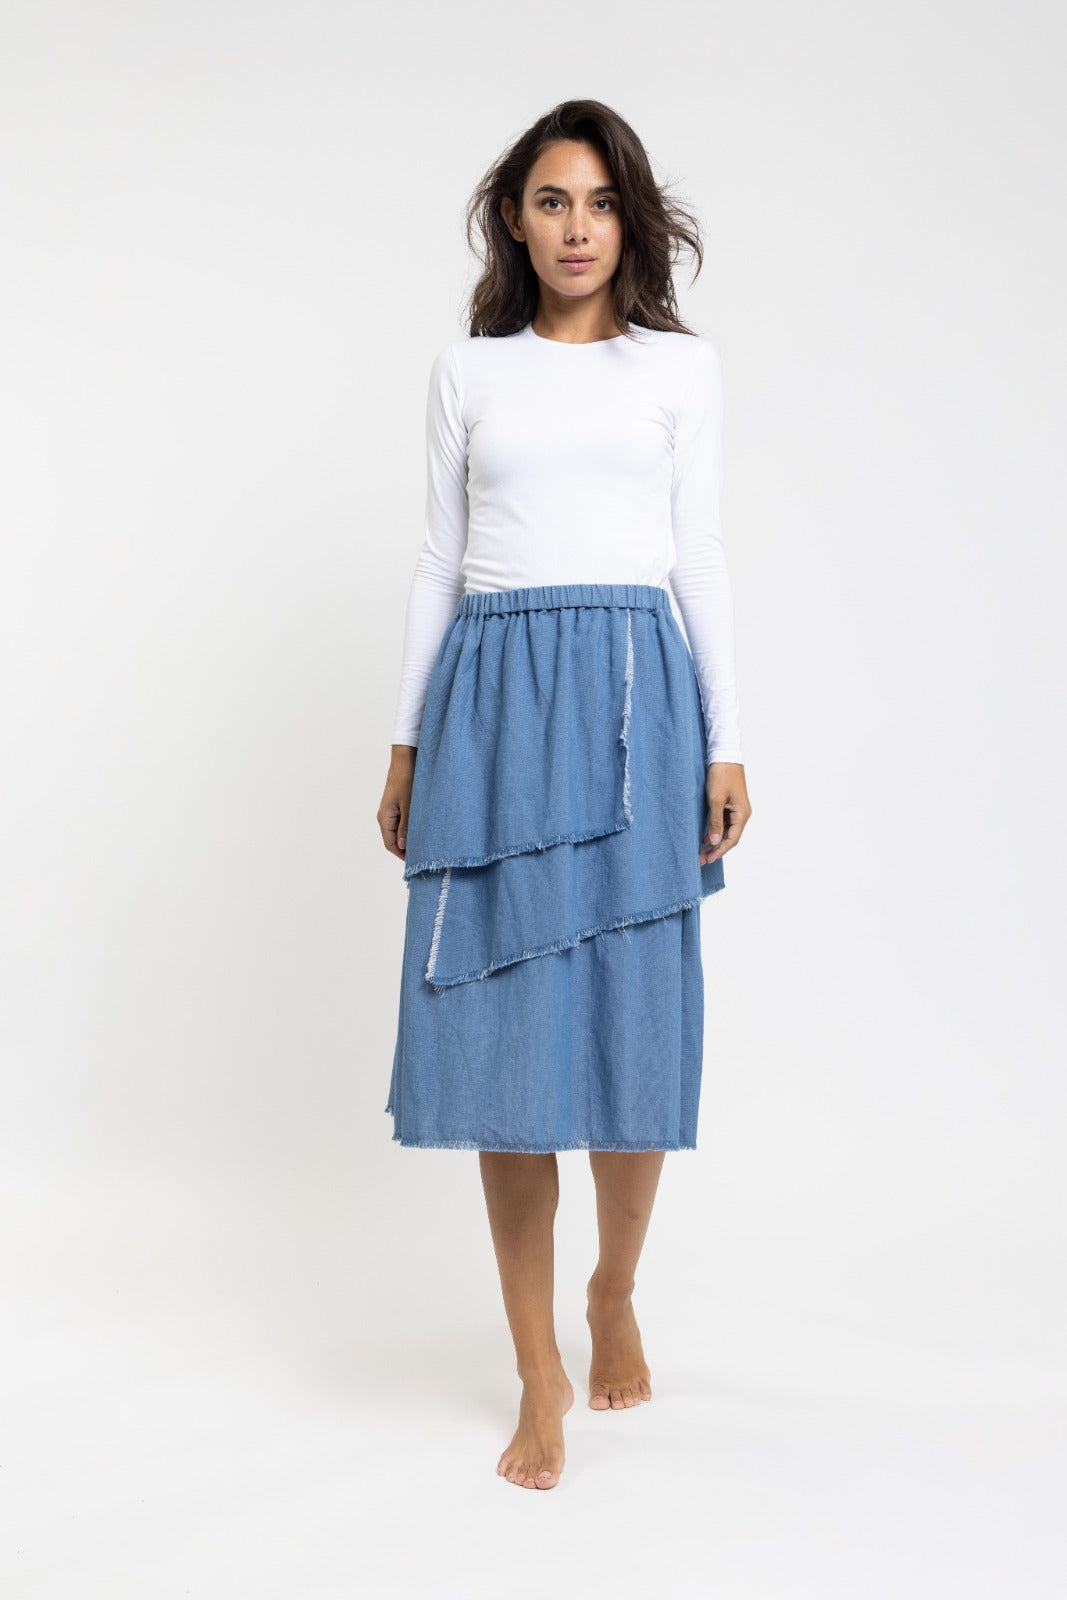 Danna Bella Blue Tiered Layer with Raw Edge TNS23502-A